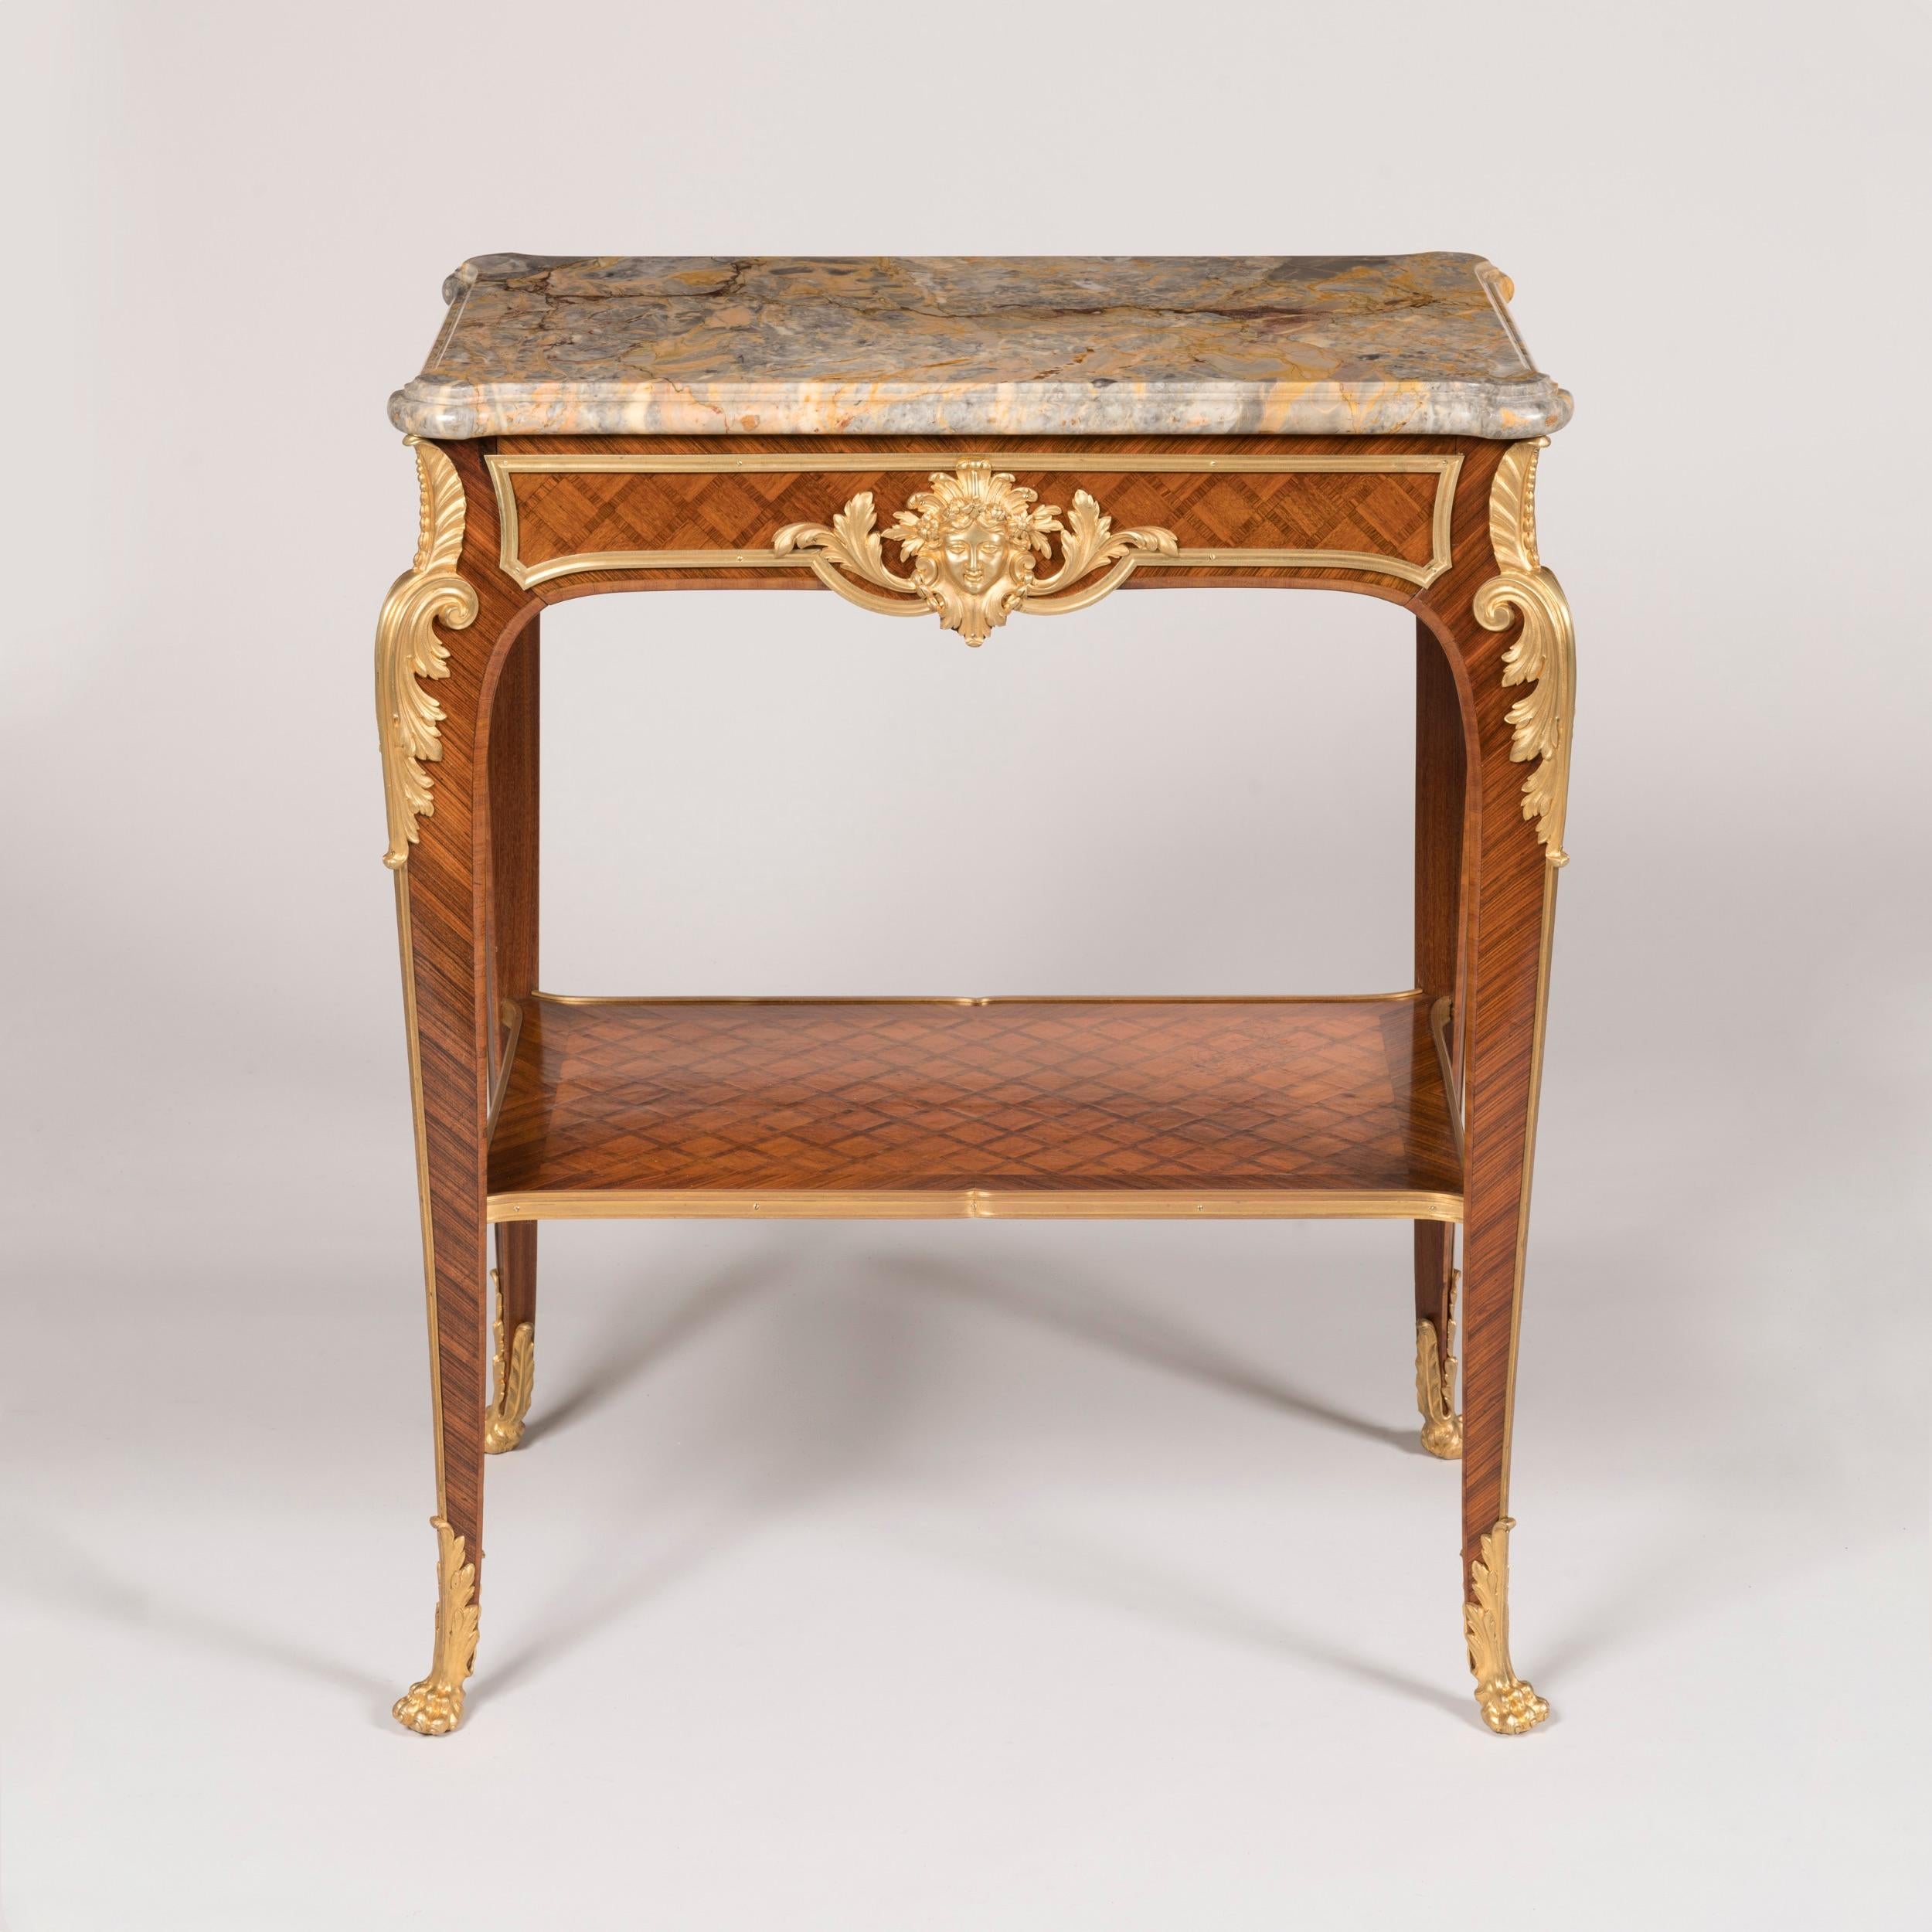 A Louis XVI Style Parquetry occasional table

Constructed in Kingwood and Tulipwood with fine ormolu bronze mounts; of free-standing form, the ormolu sabot-shod feet modelled as lions' paws, swept cabriole legs dressed with acanthus- and